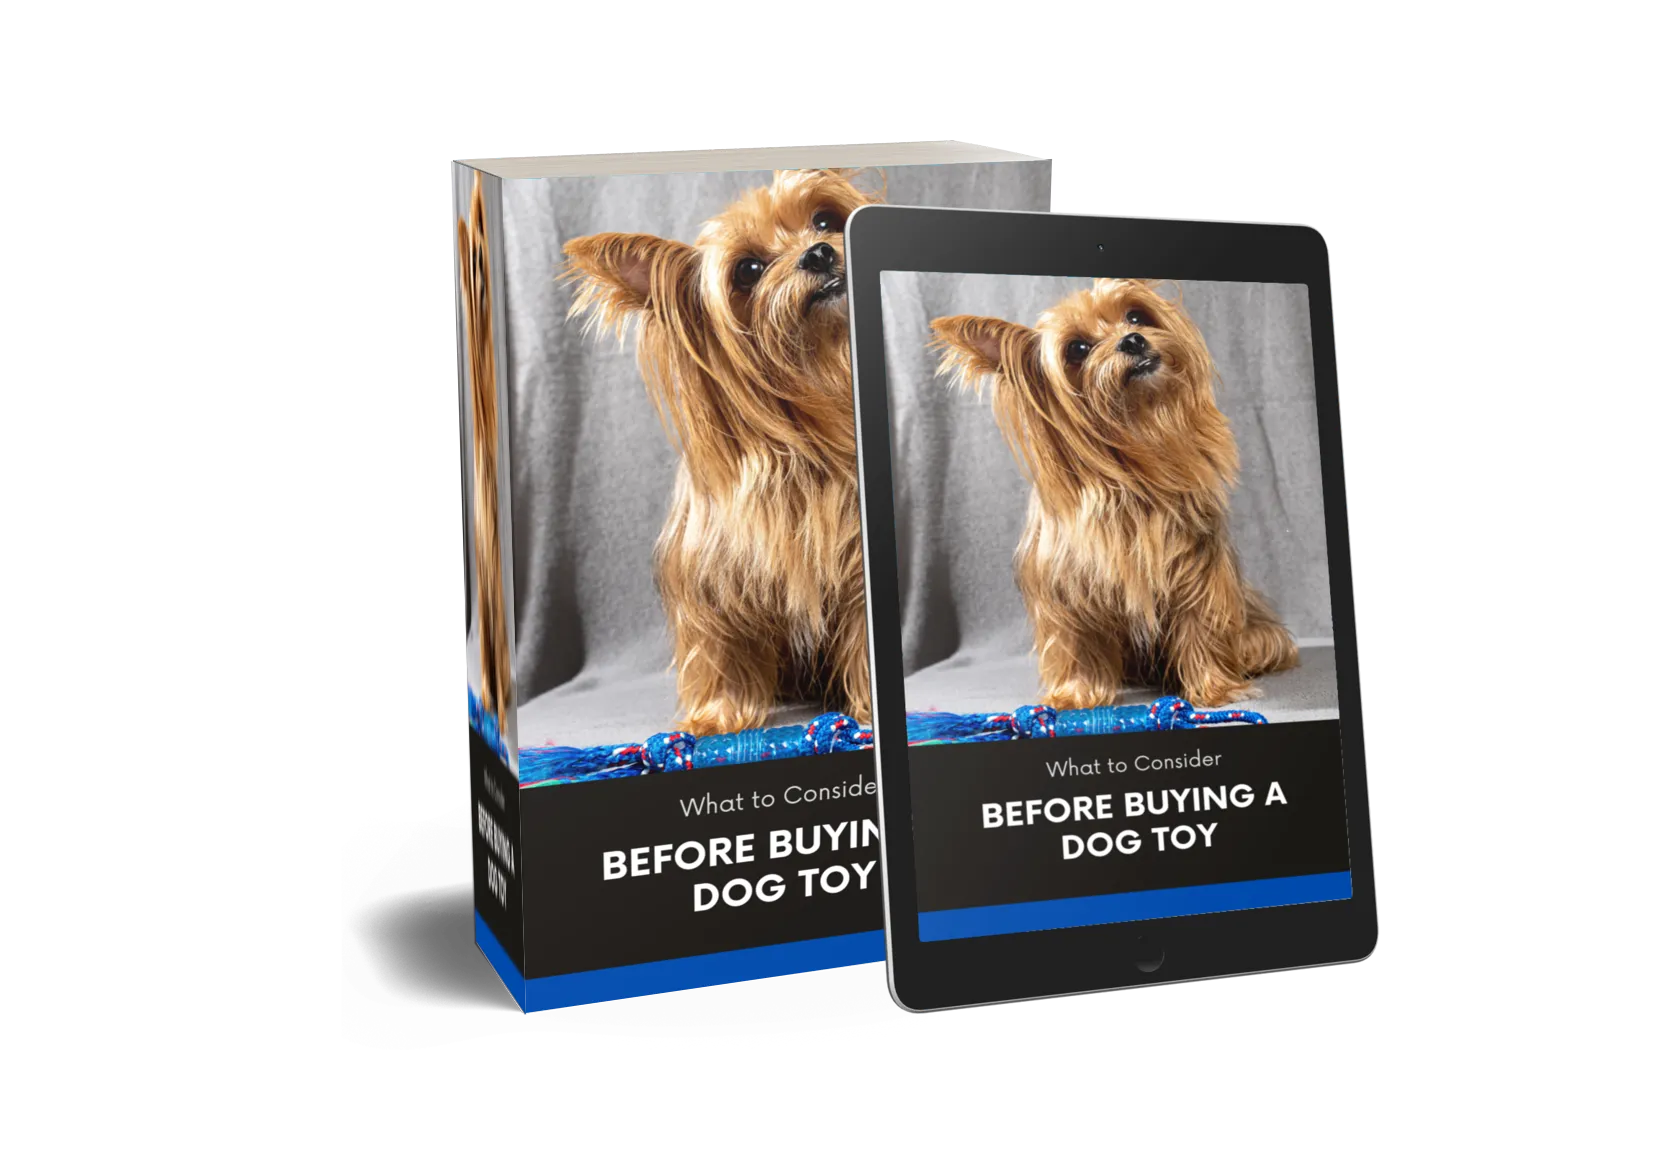 What to Consider Before Buying a Dog Toy